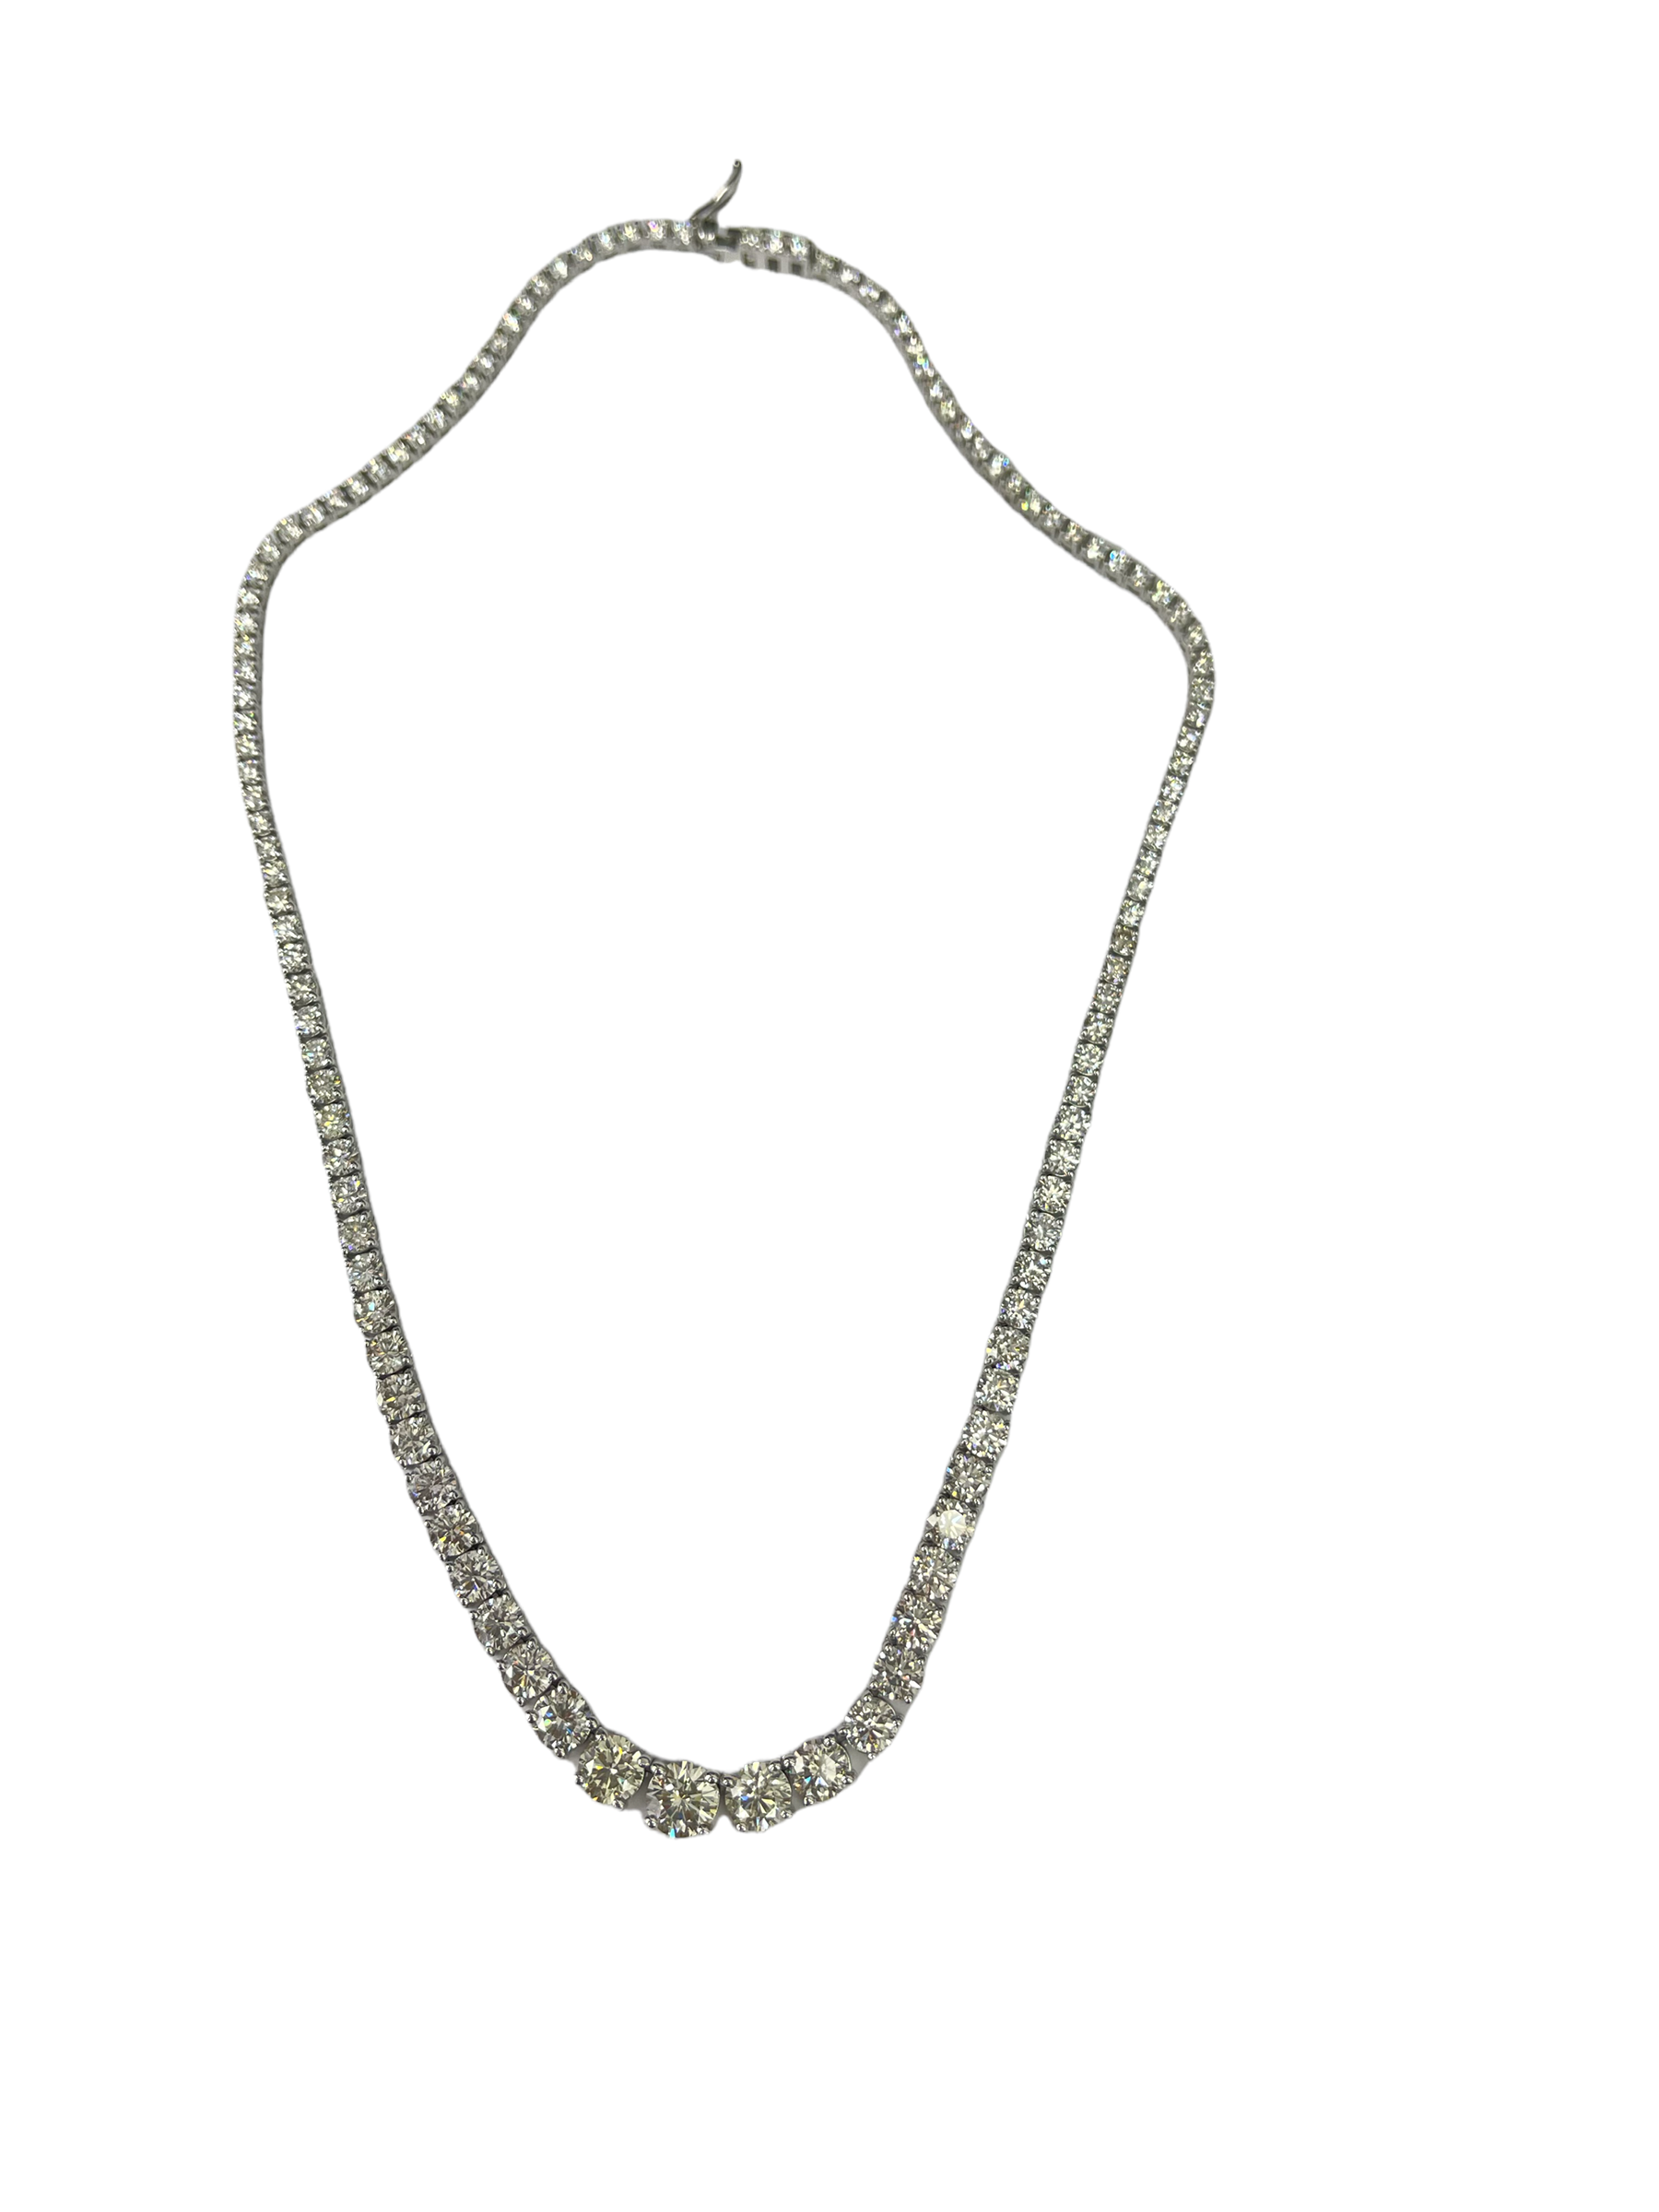 Graduated Tennis Diamond Necklace Chain 18kt White Gold